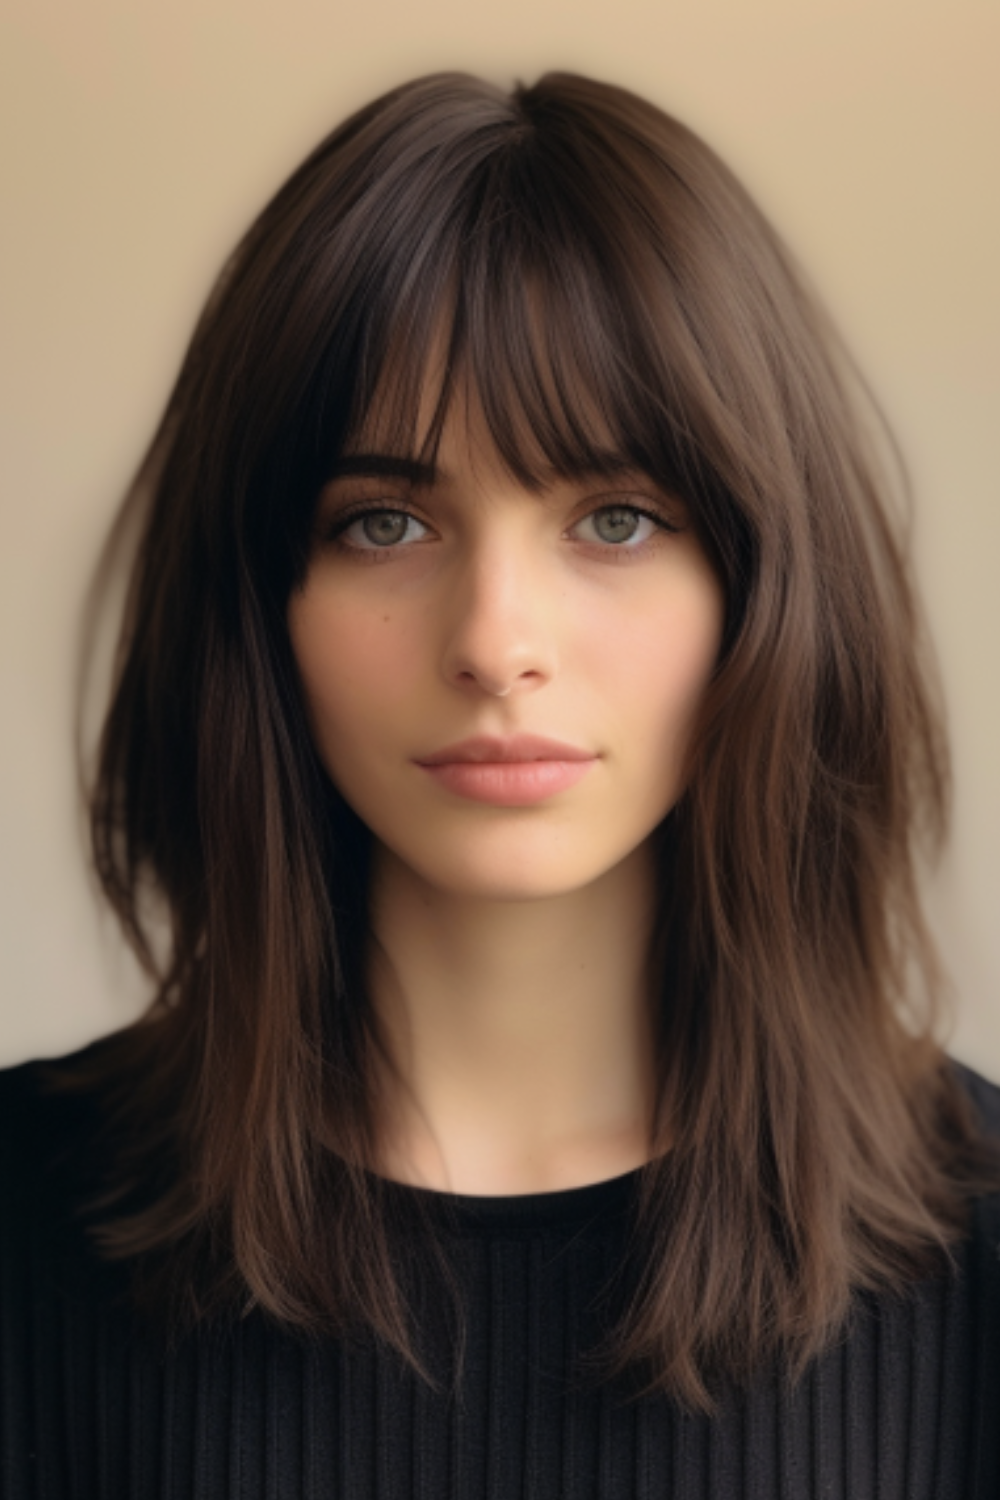 Bangs-a-licious: The Best Hairstyles with Bangs for Every Face Shape